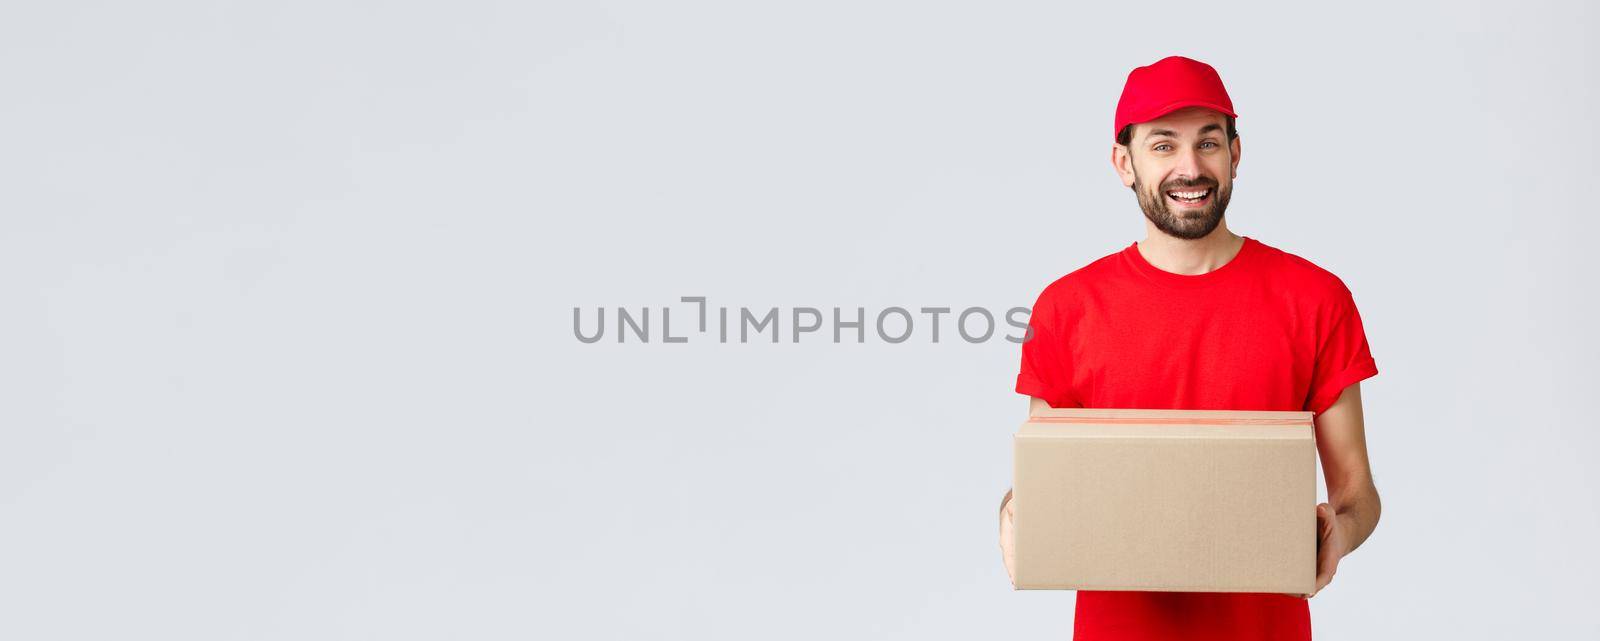 Order delivery, online shopping and package shipping concept. Friendly smiling courier in red uniform cap and t-shirt, handing out packages for customers. Employee bring parcel box, grey background.